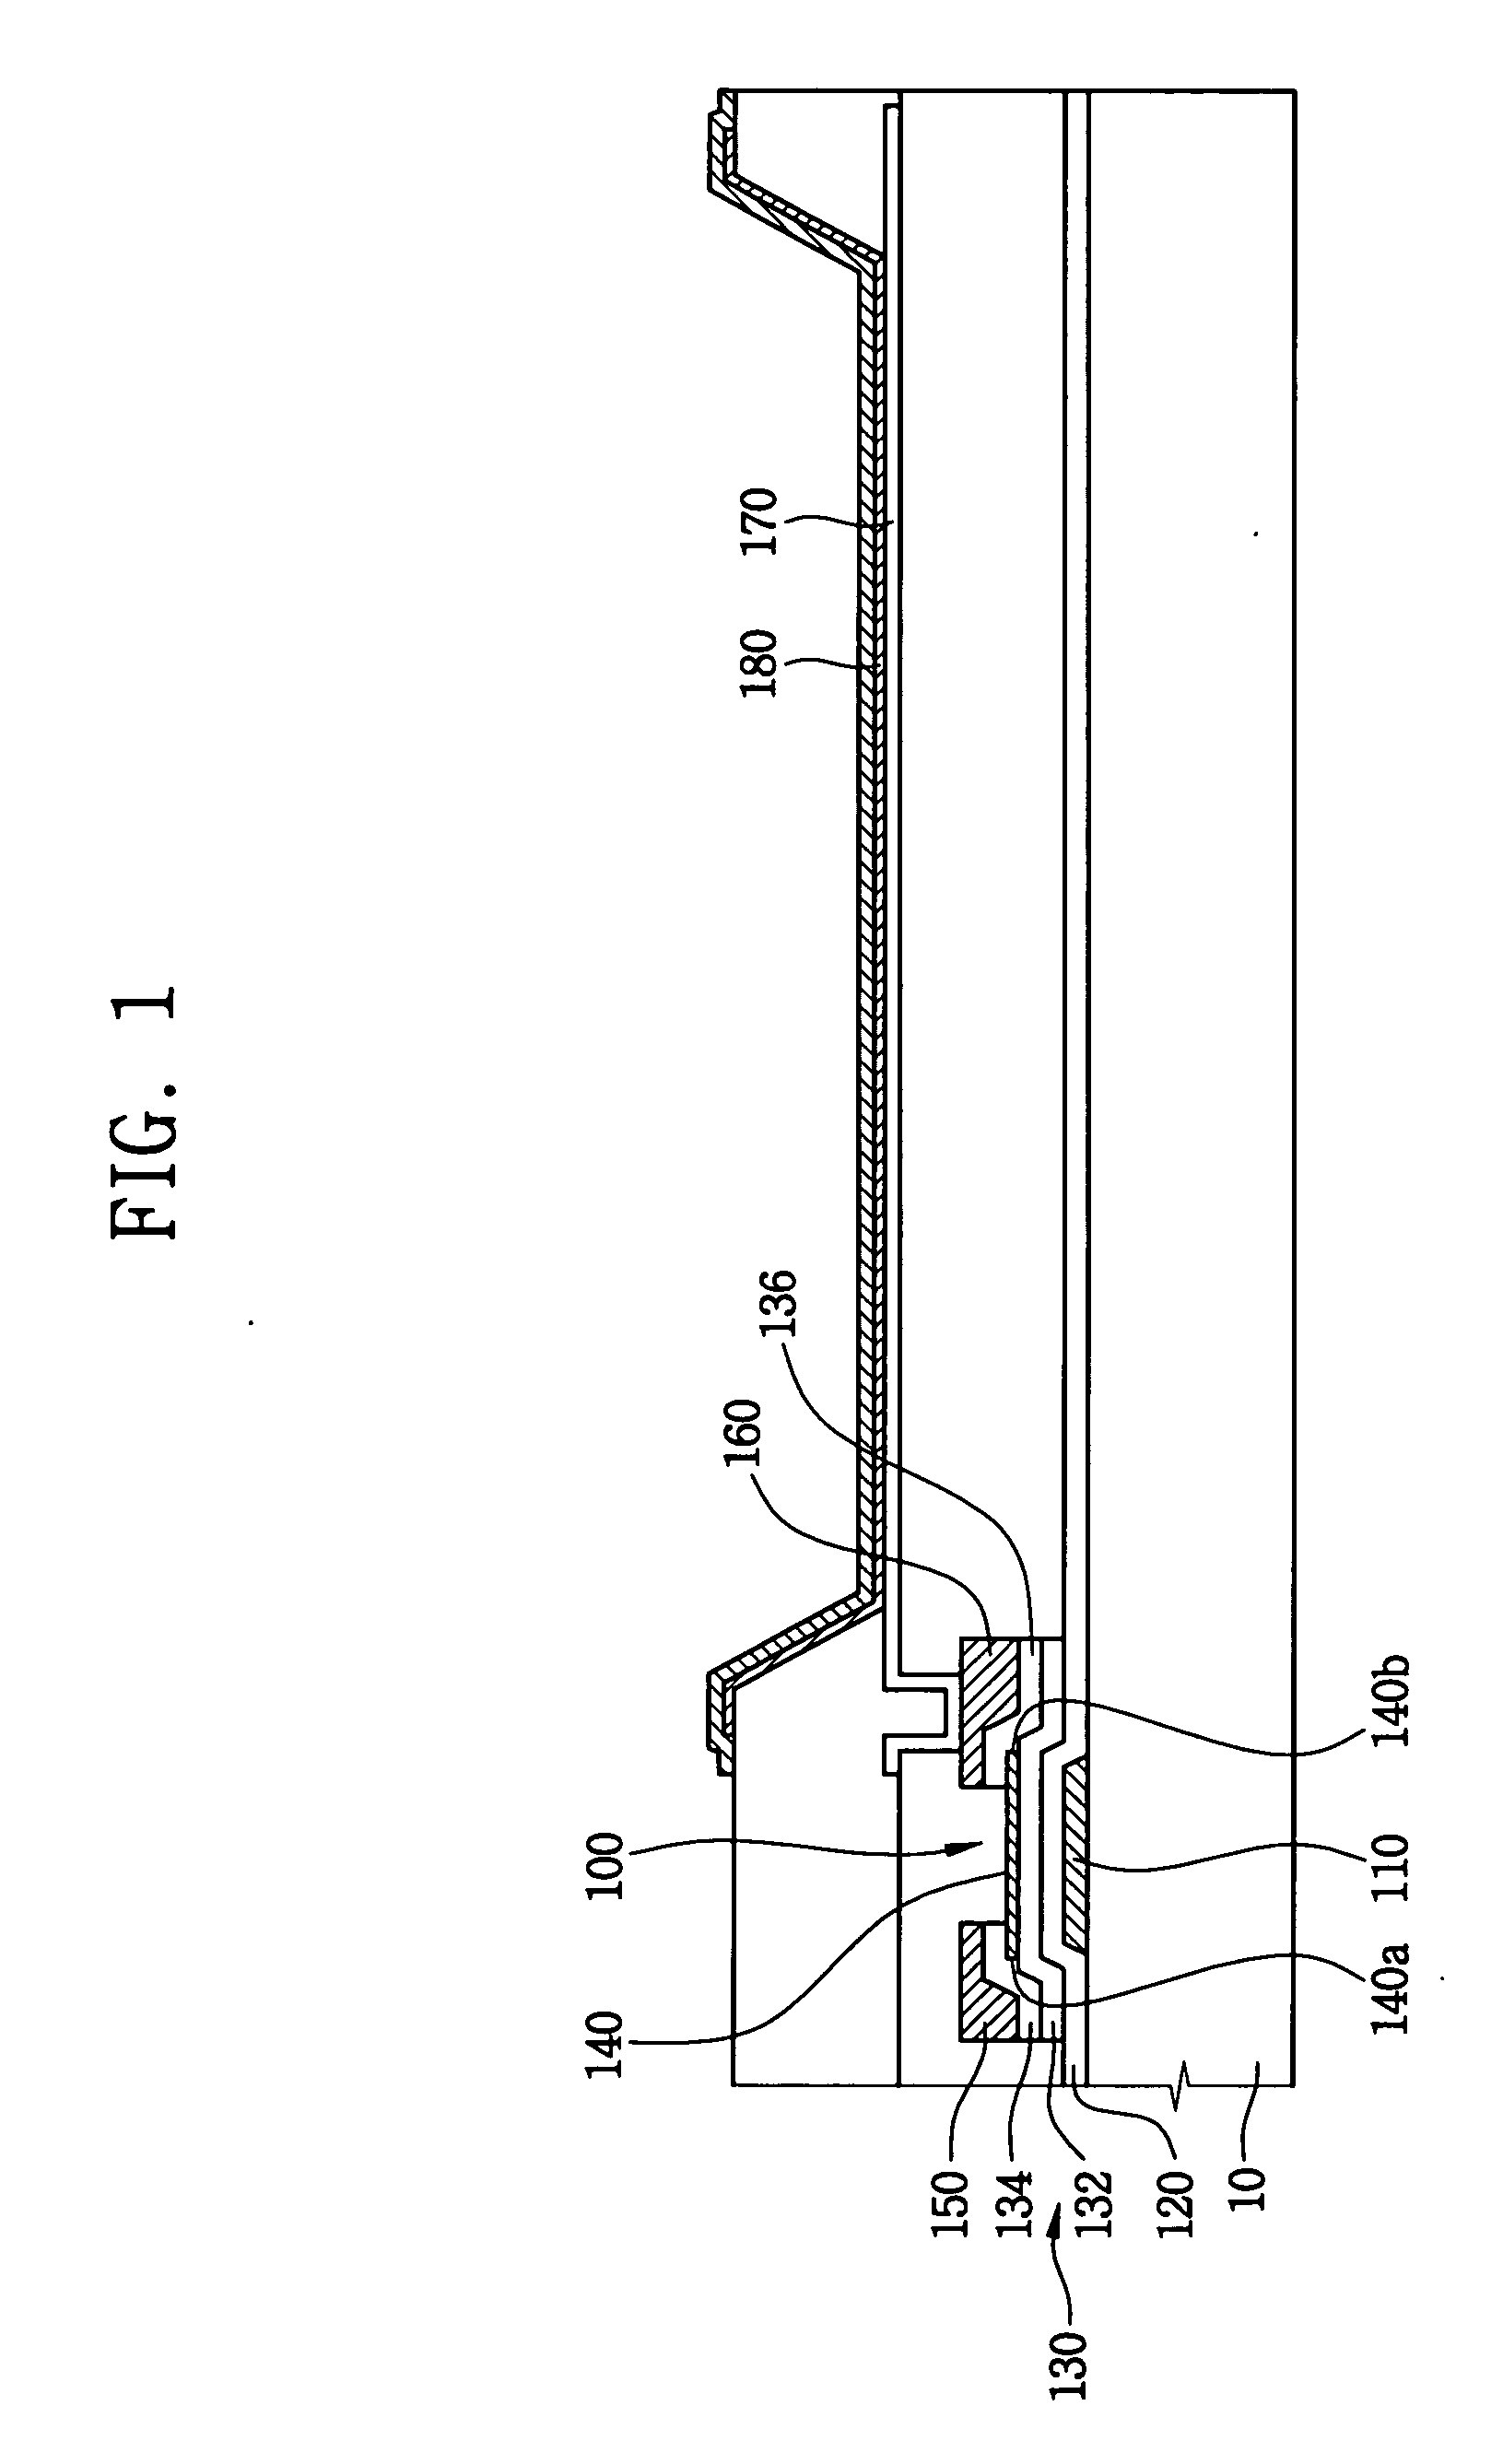 Electro-luminescence device including a thin film transistor and method of fabricating an electro-luminescence device